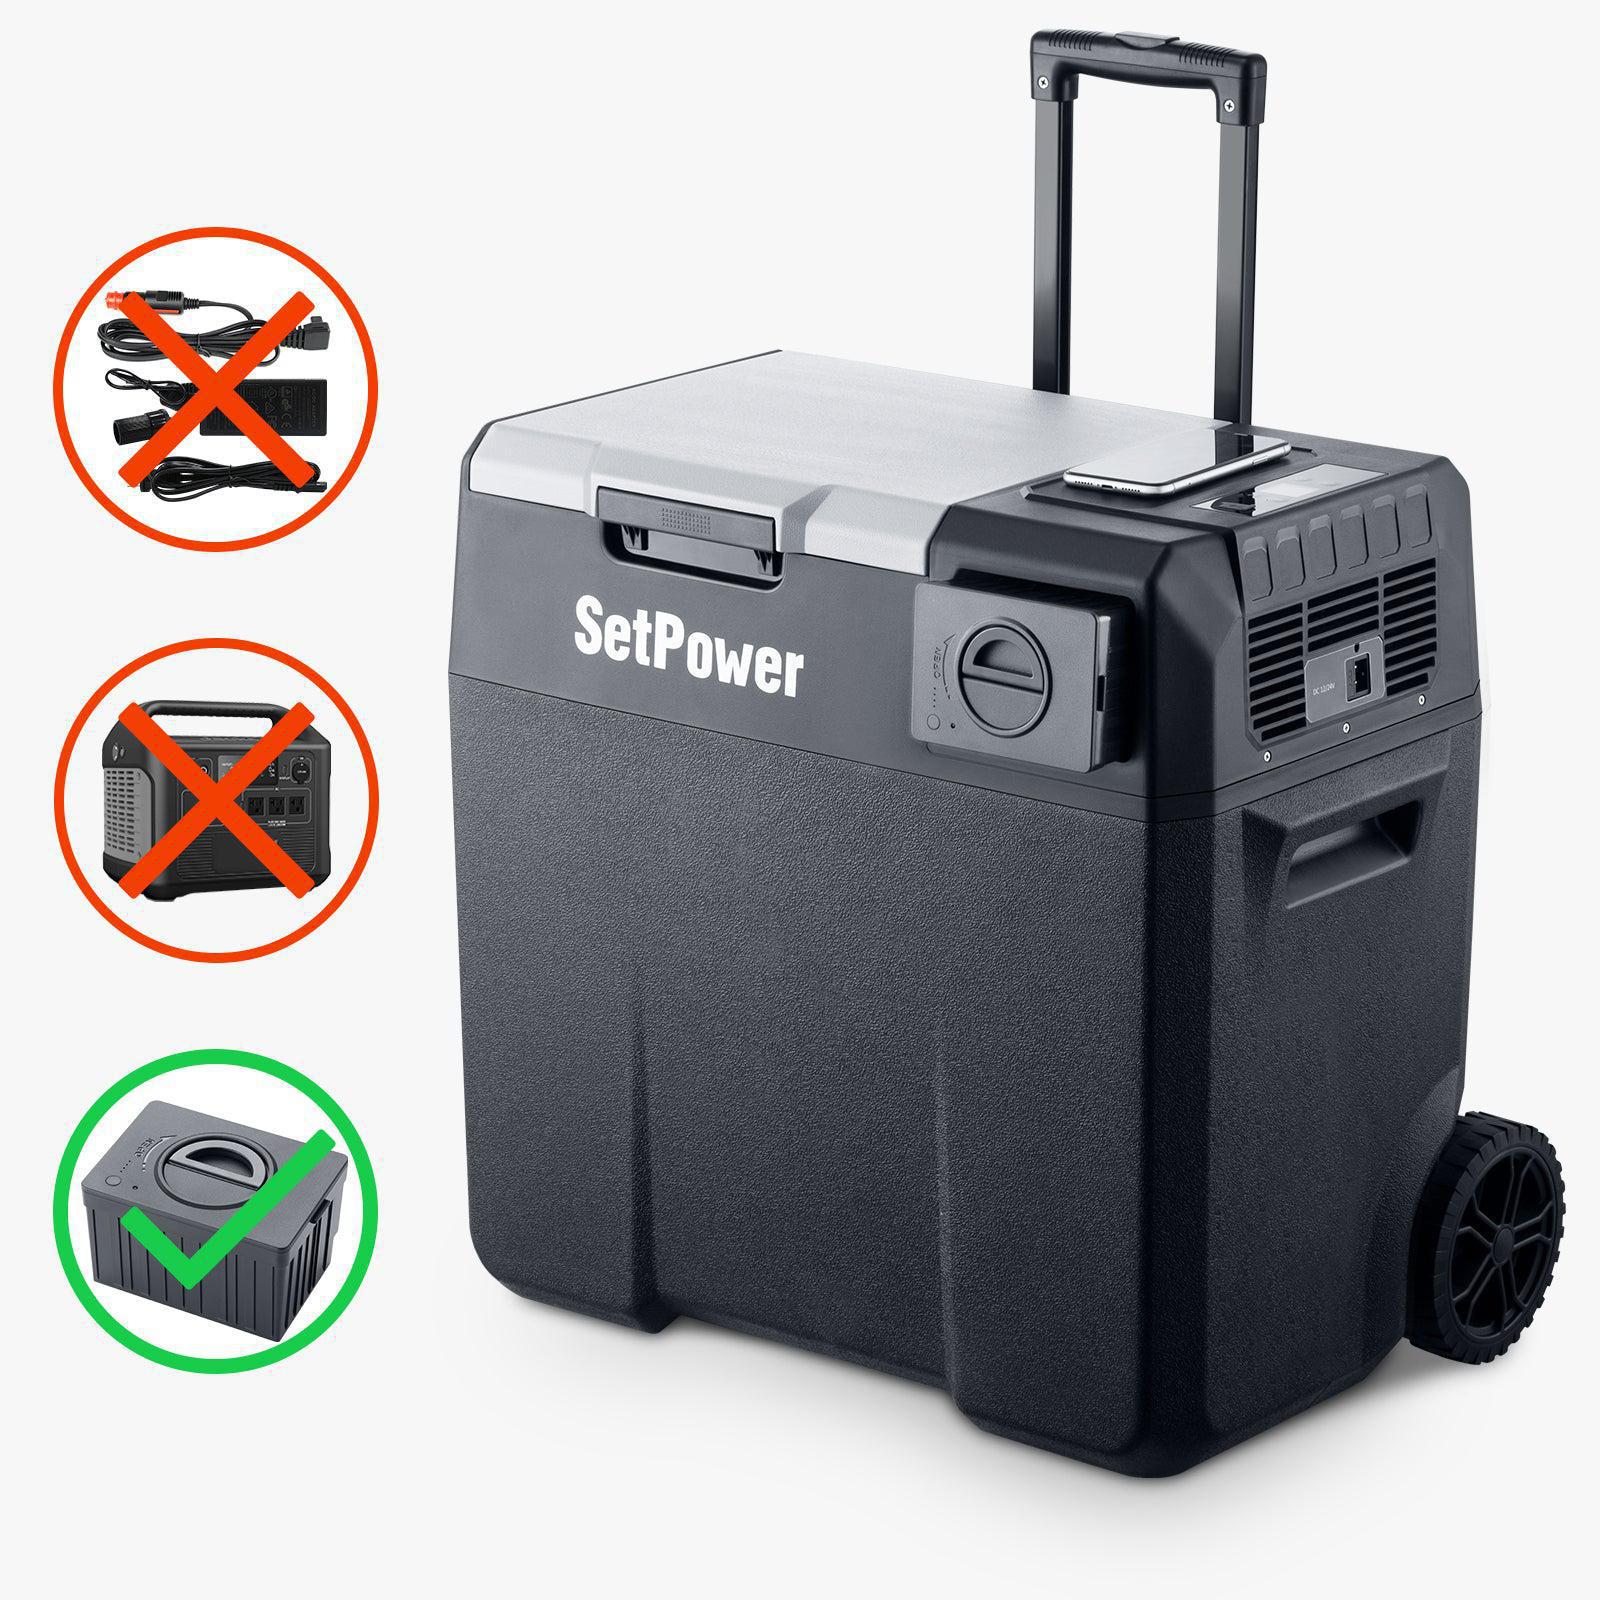 Setpower X50 Portable Car Fridge with rechargeable Battery.